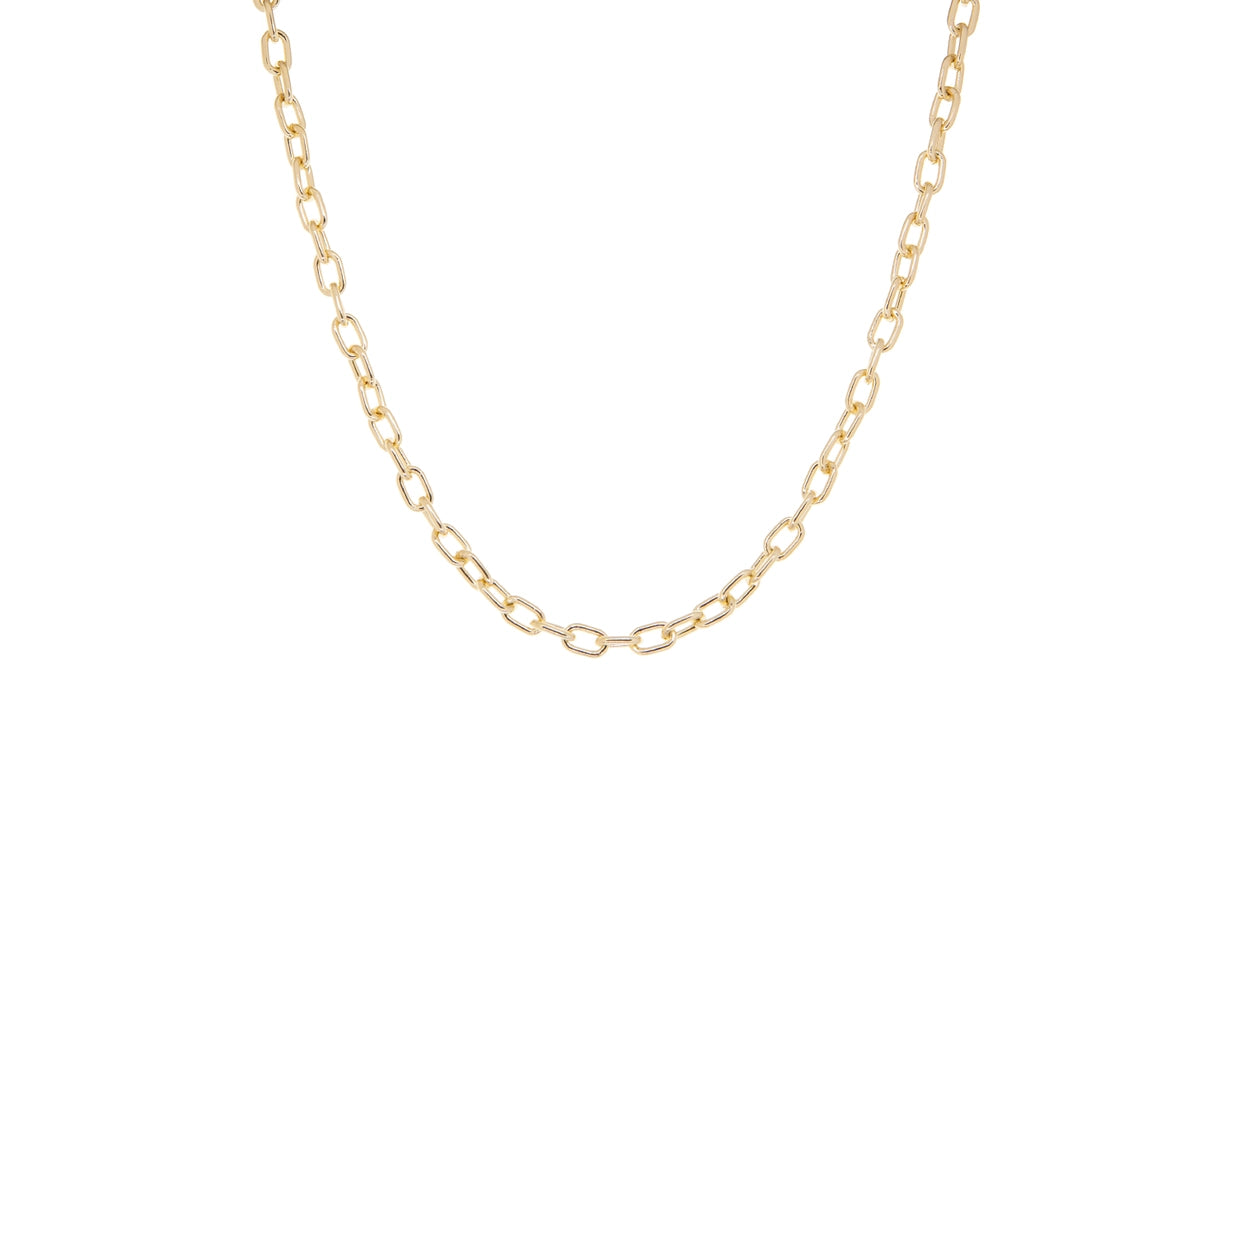 Gold Plated 16" Cable Chain Link Necklace